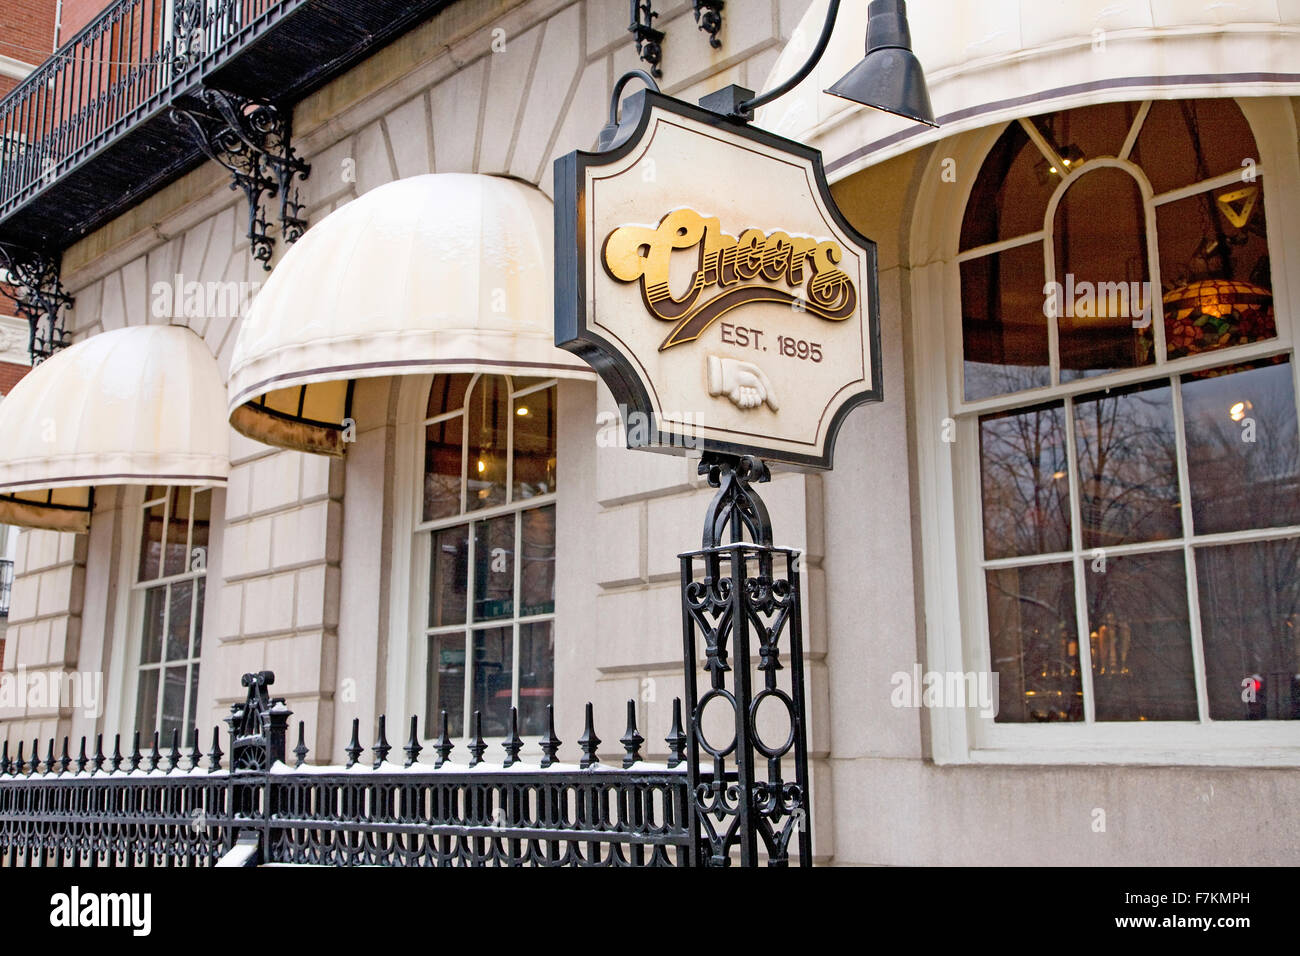 'Cheers Bar' featured in 'Cheers' TV show, Established in 1895, Boston, MA., New England, USA Stock Photo